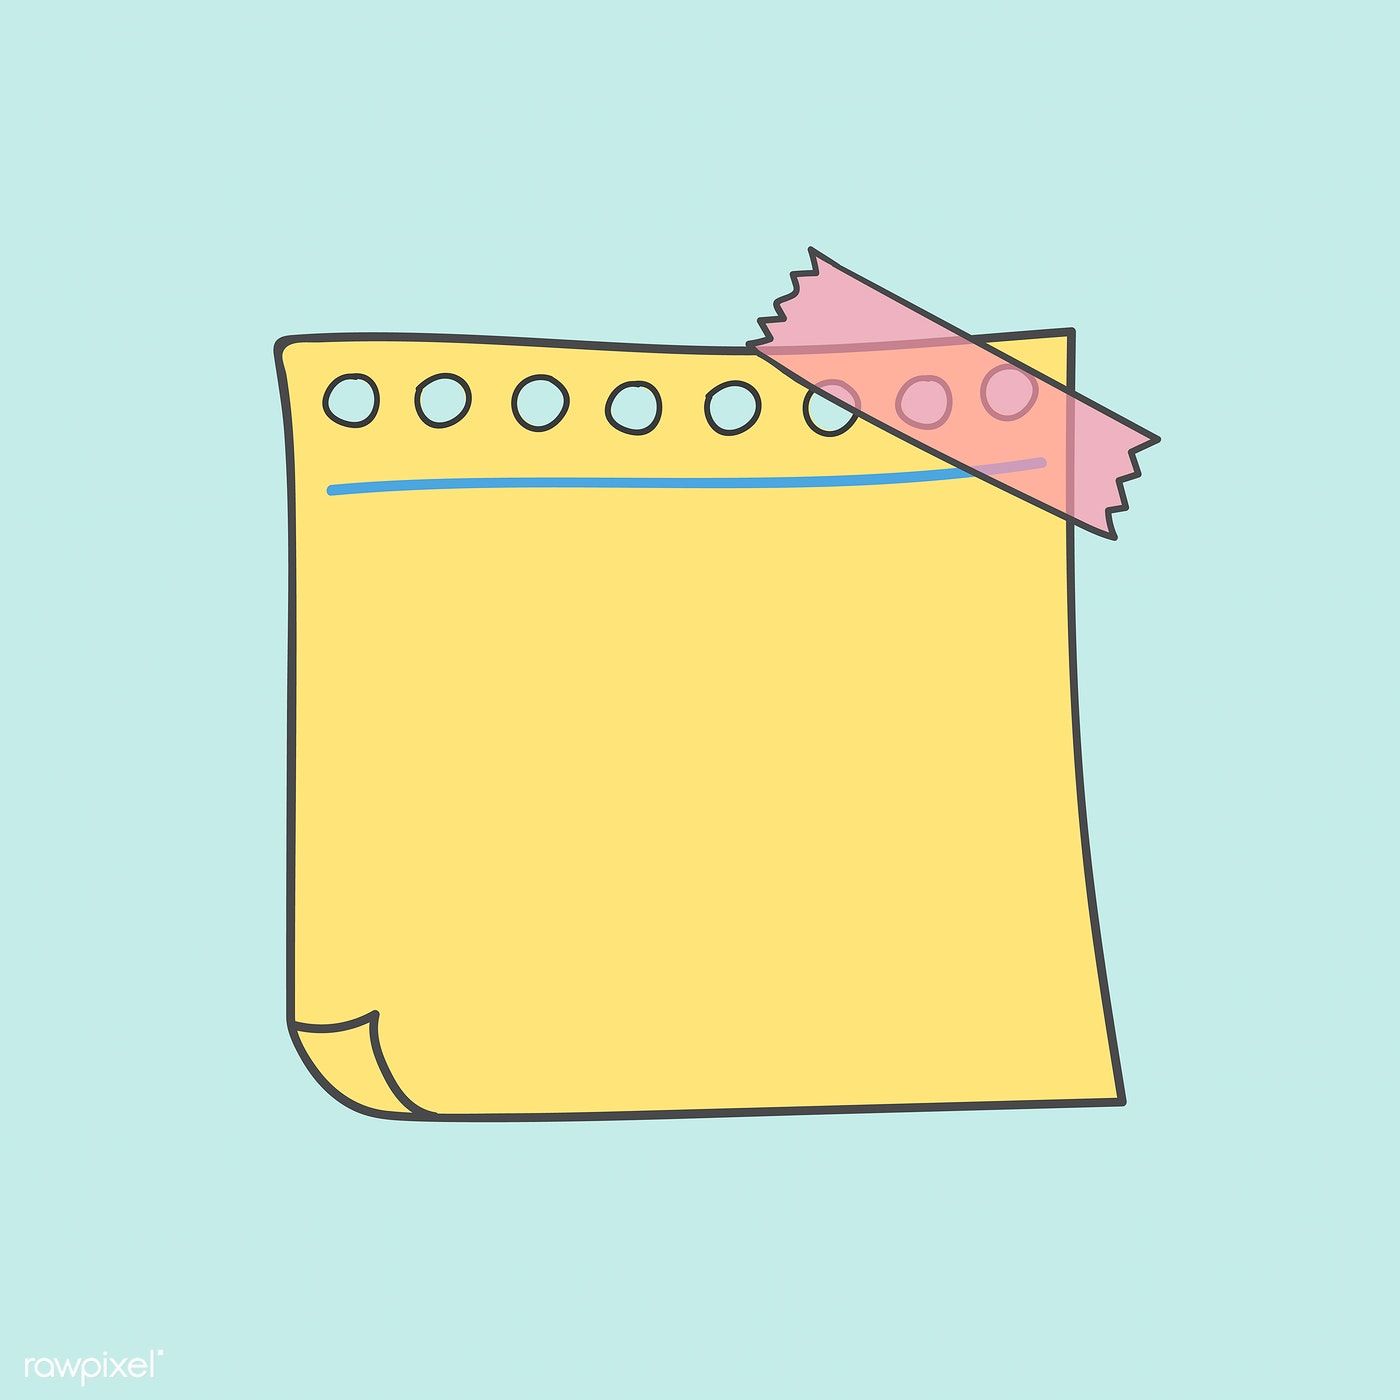 Background Sticky Notes Design - HD Wallpaper 